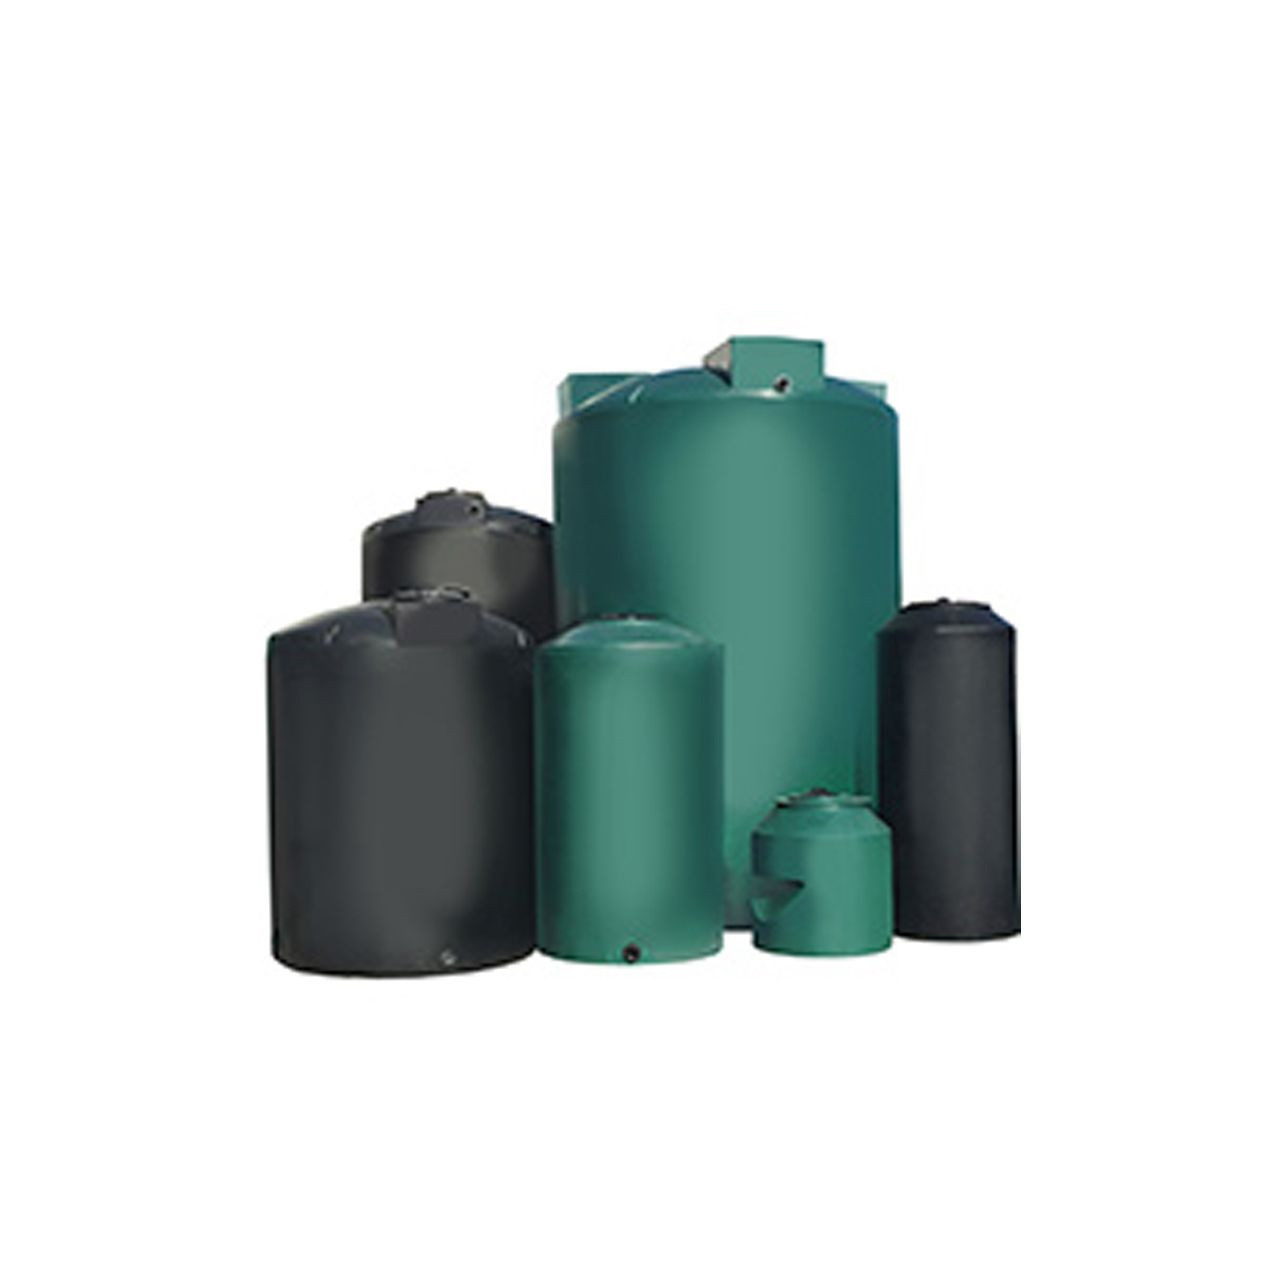 Chem-Tainer 500 Gallon Vertical Water Storage Tank | TC4676IW-GREEN